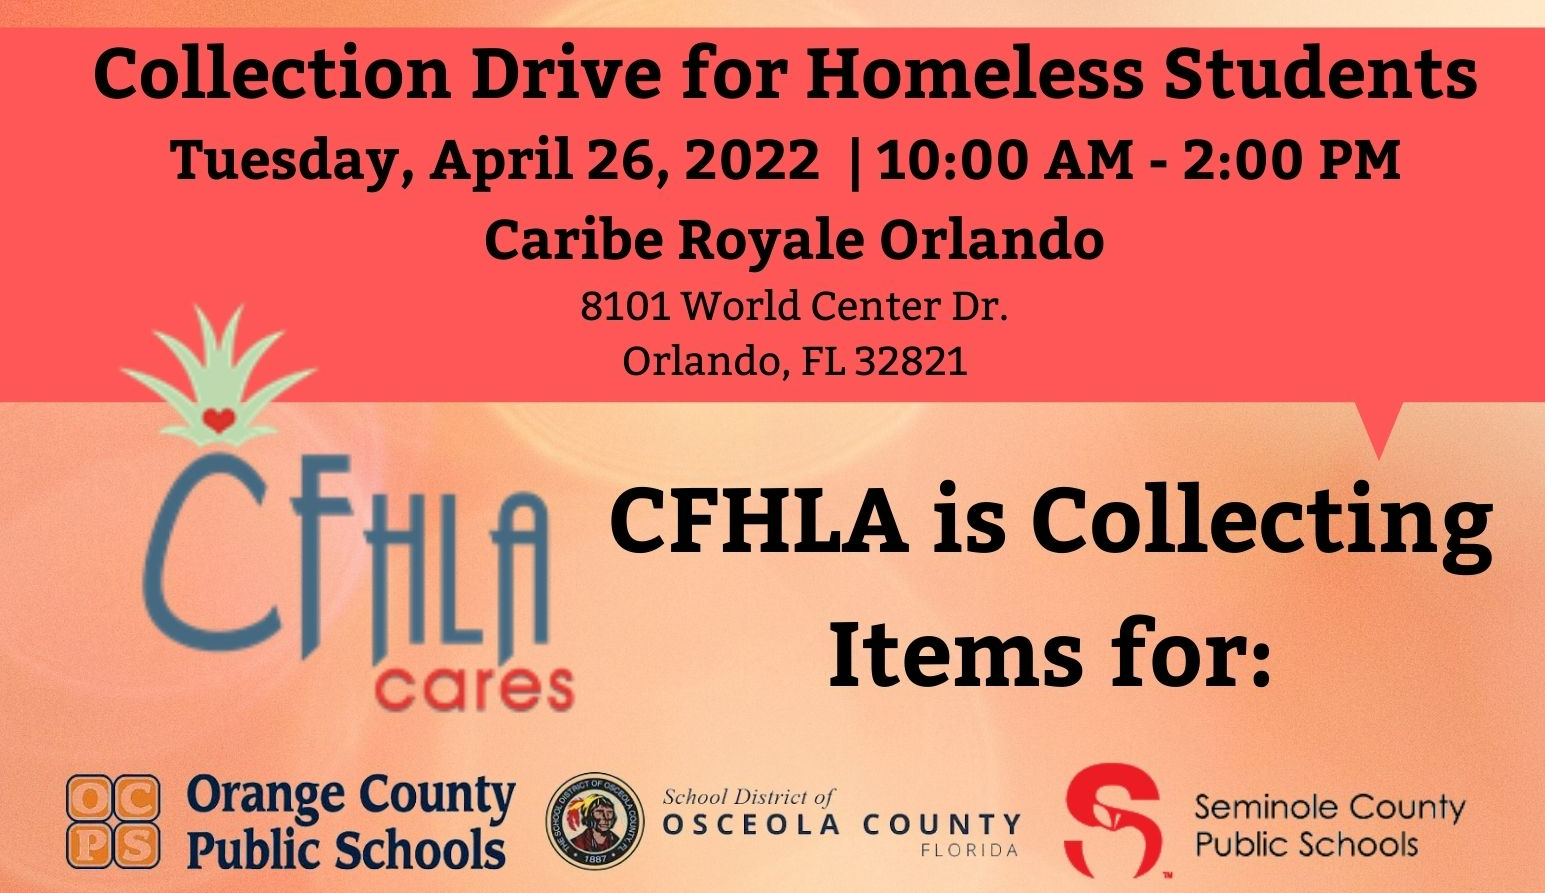 Cares Collection Drive in support of the homeless students of Central Florida